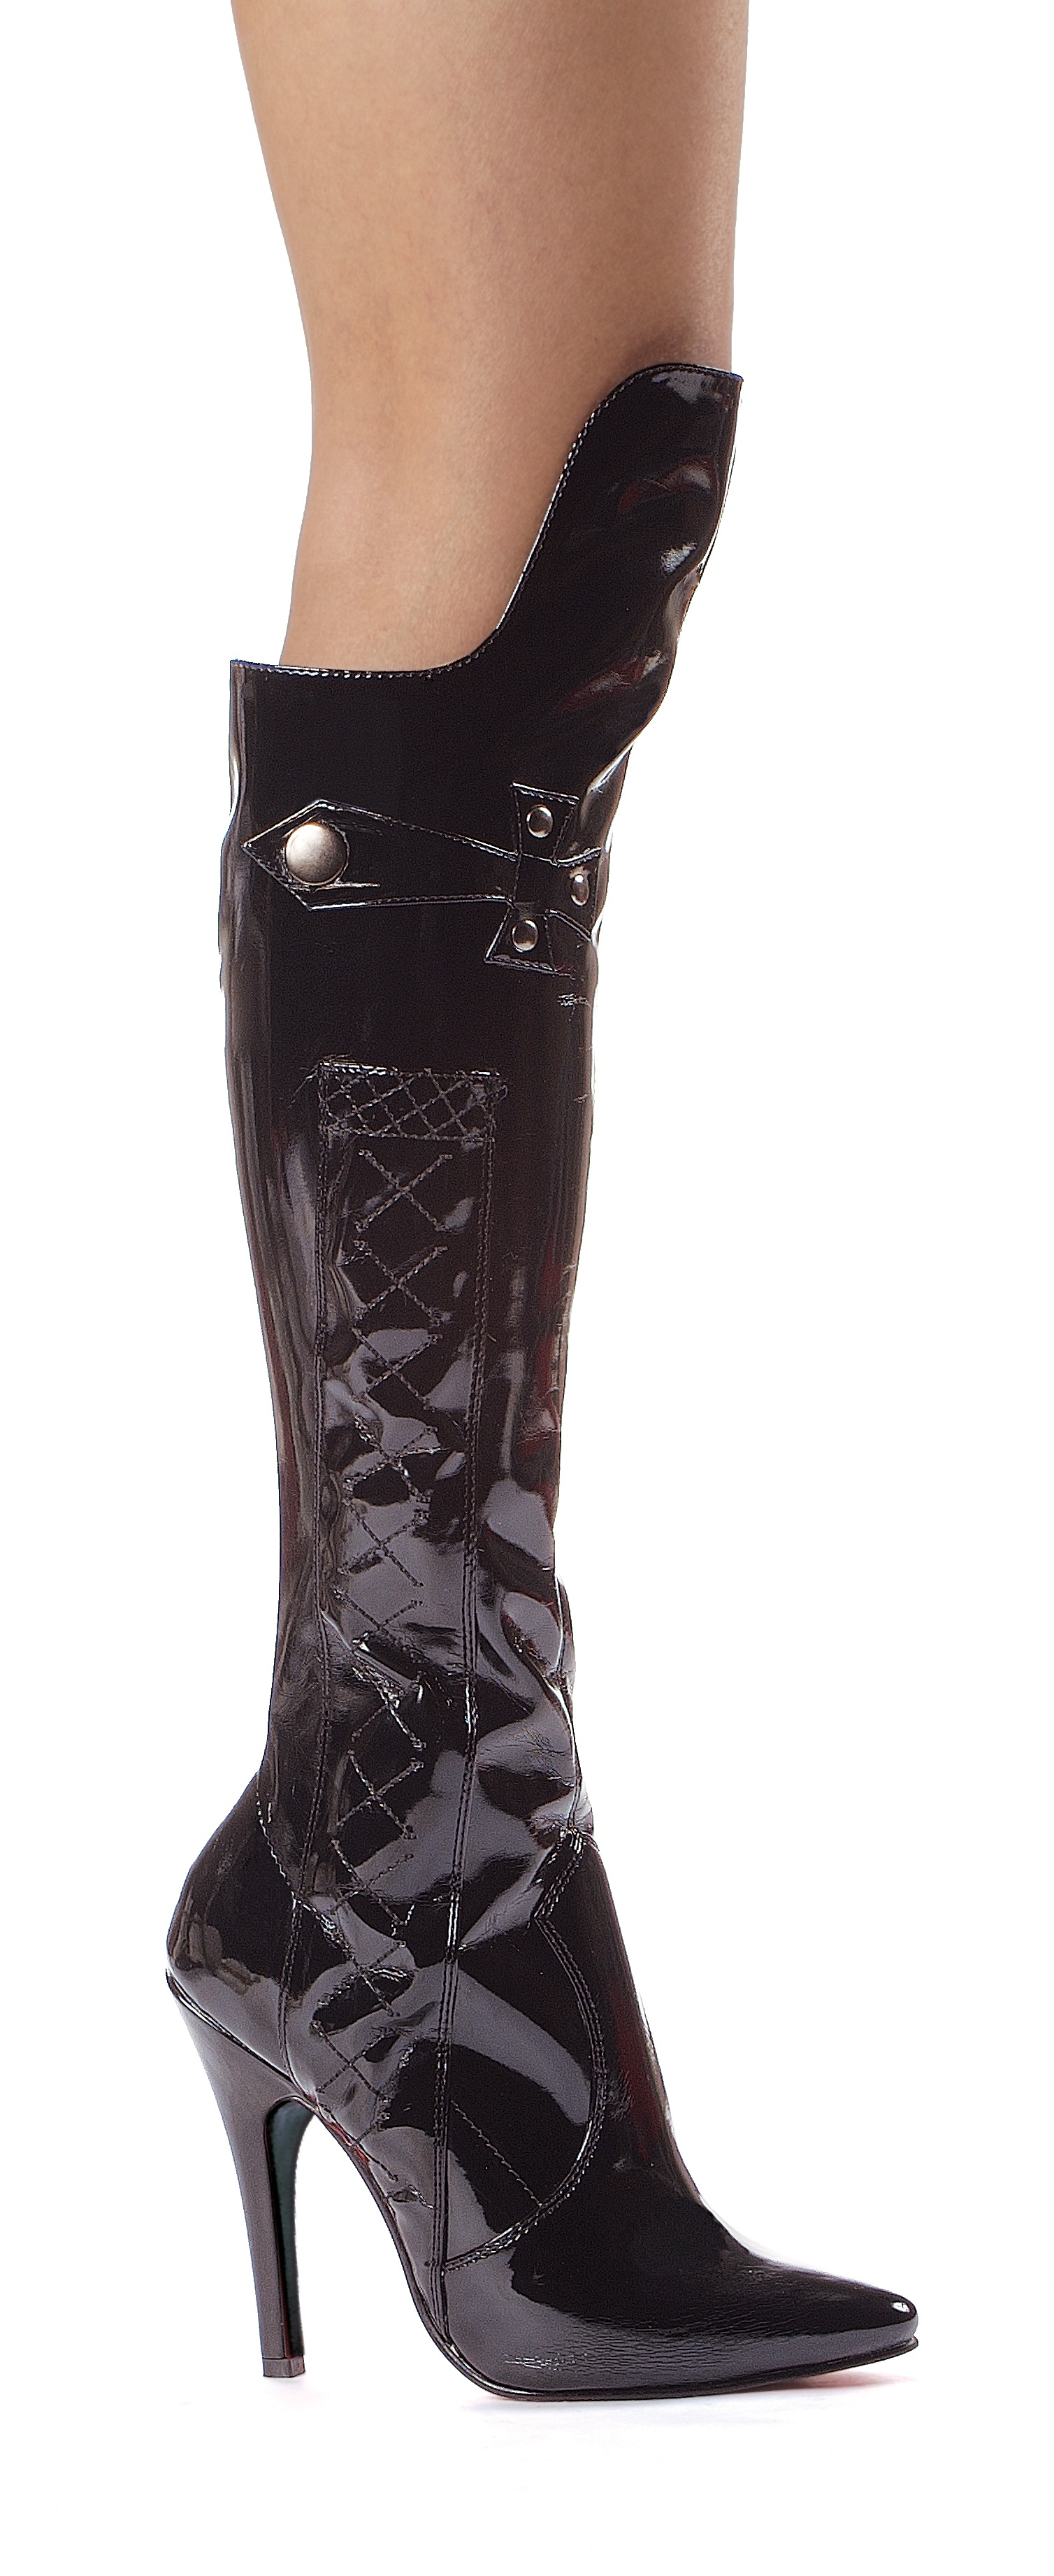 Sadie- 5 Inch Heel Boots With High Cuff and Whip